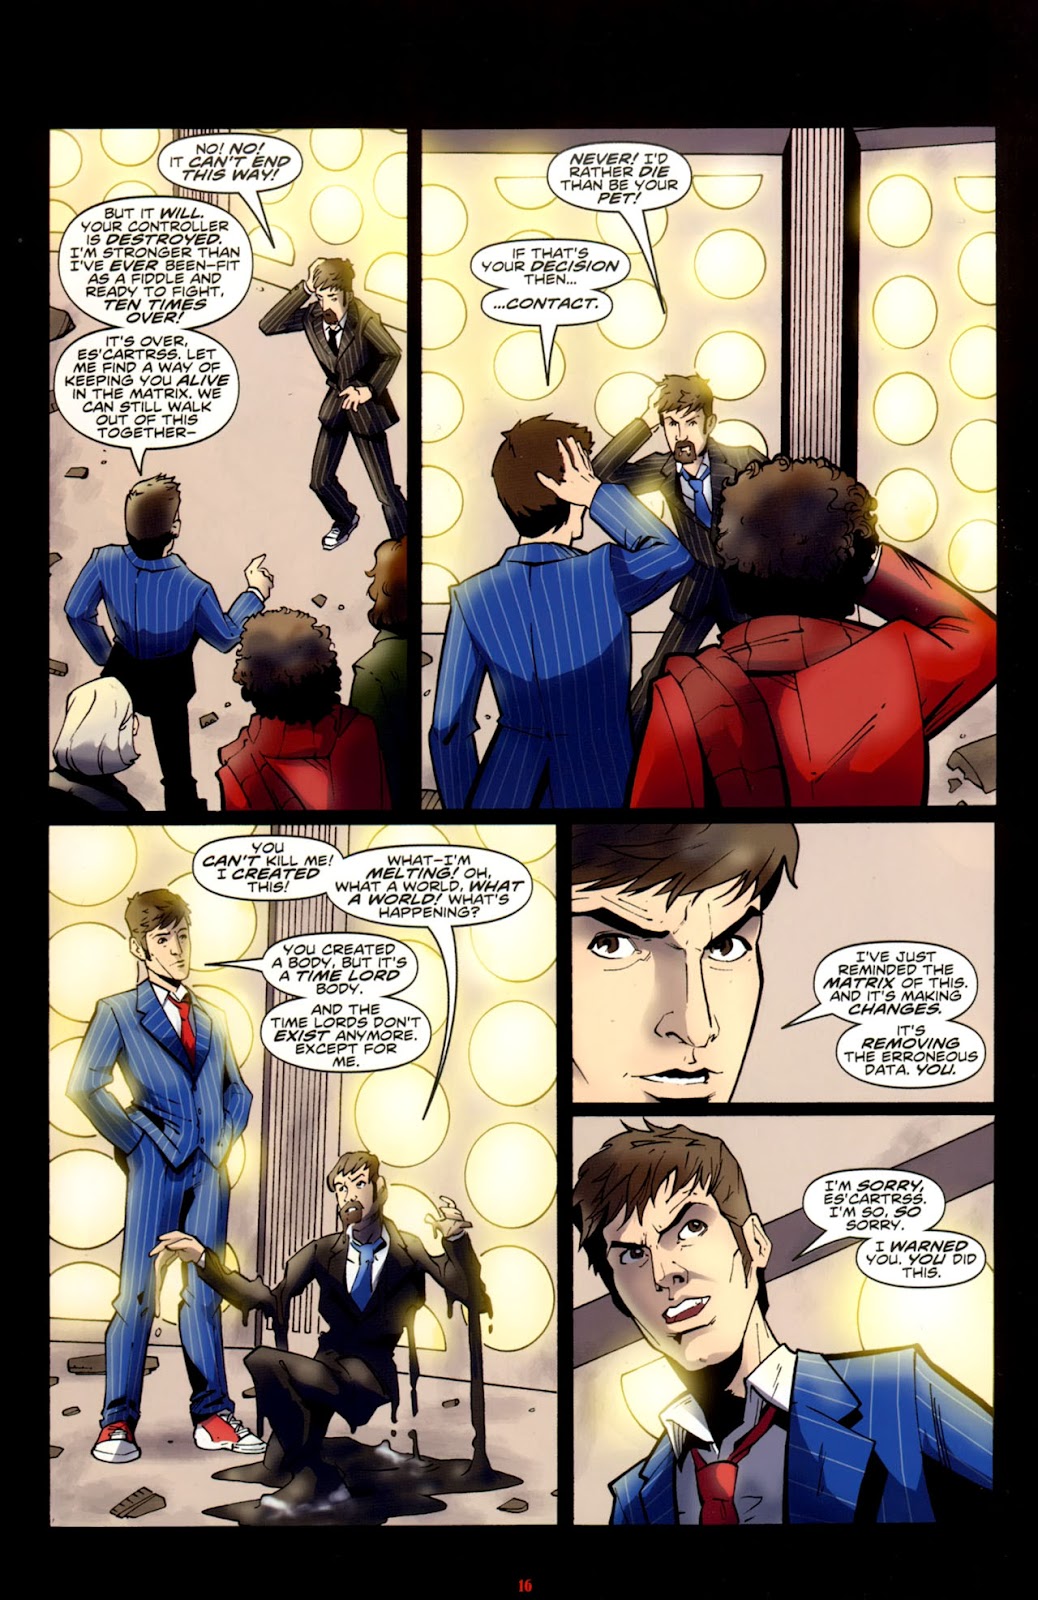 Doctor Who: The Forgotten issue 6 - Page 17